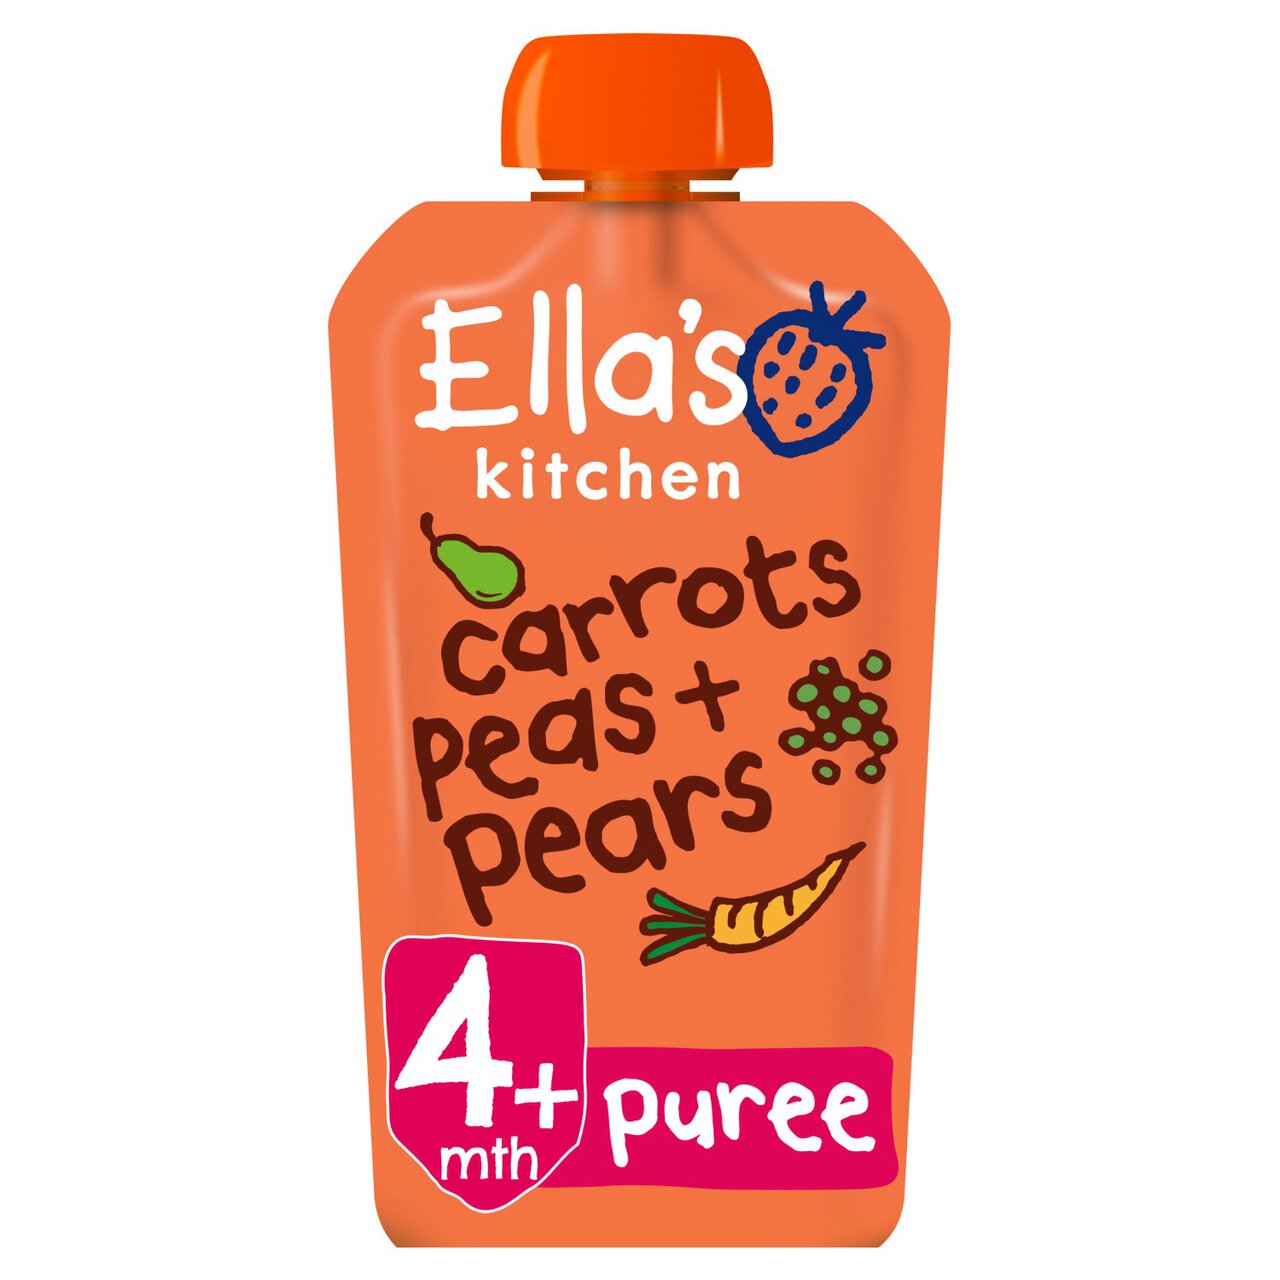 Ella's Kitchen Carrots, Peas and Pears Baby Food Pouch 4+ Months 120g